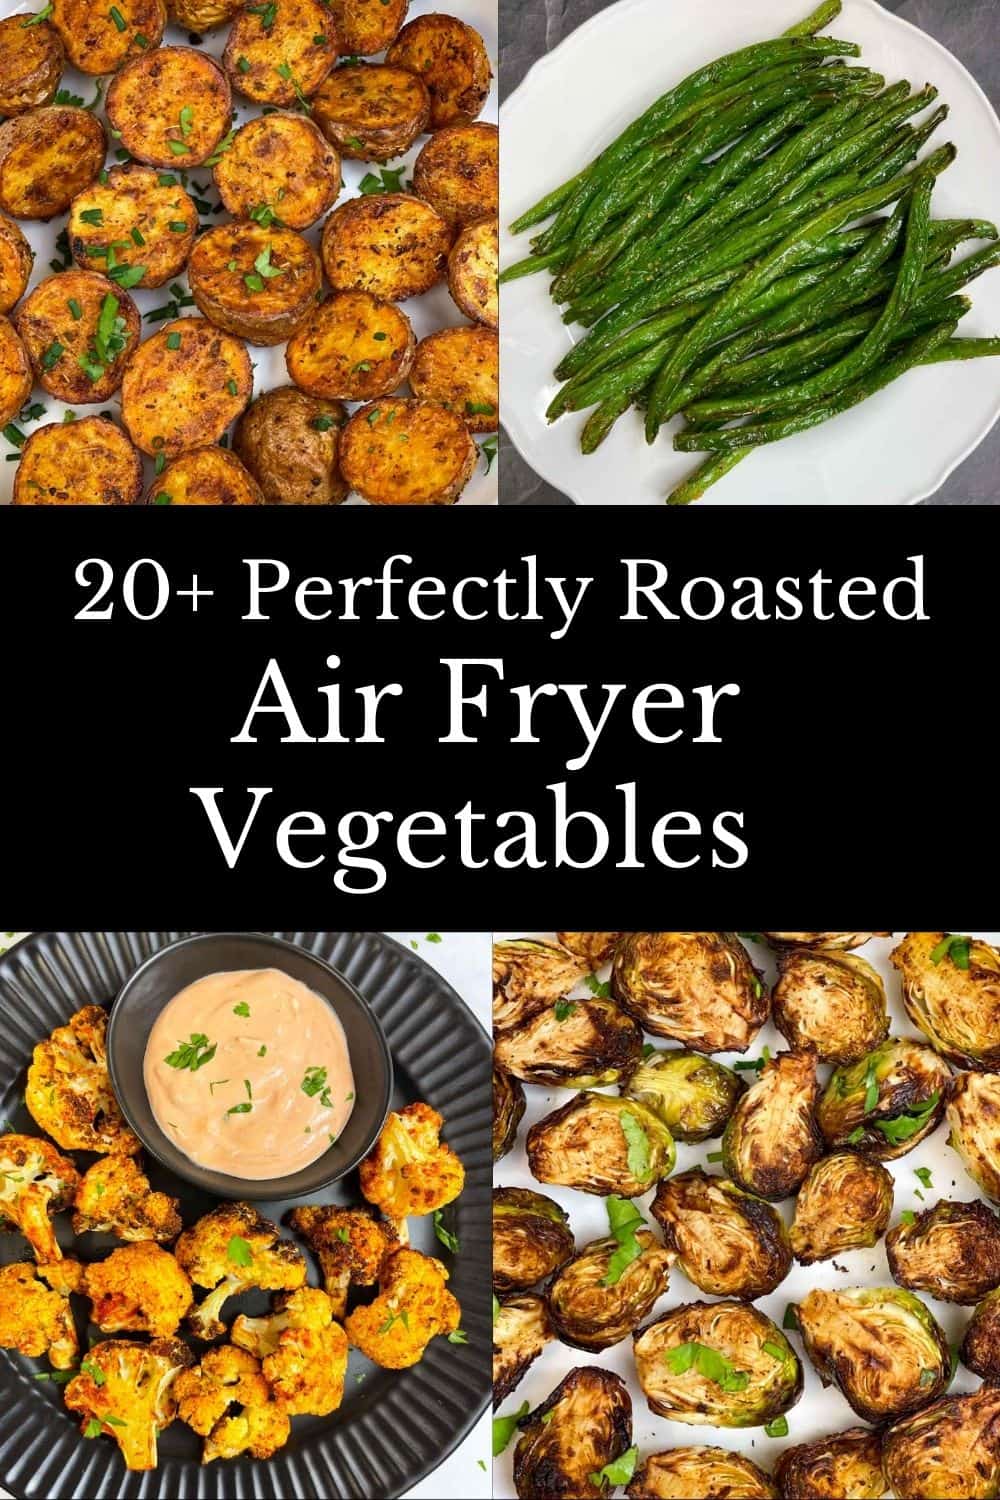 A collection of over 20+ quick and easy Air Fryer Vegetables recipes using your air fryer to prepare some of the best vegetable side dishes.